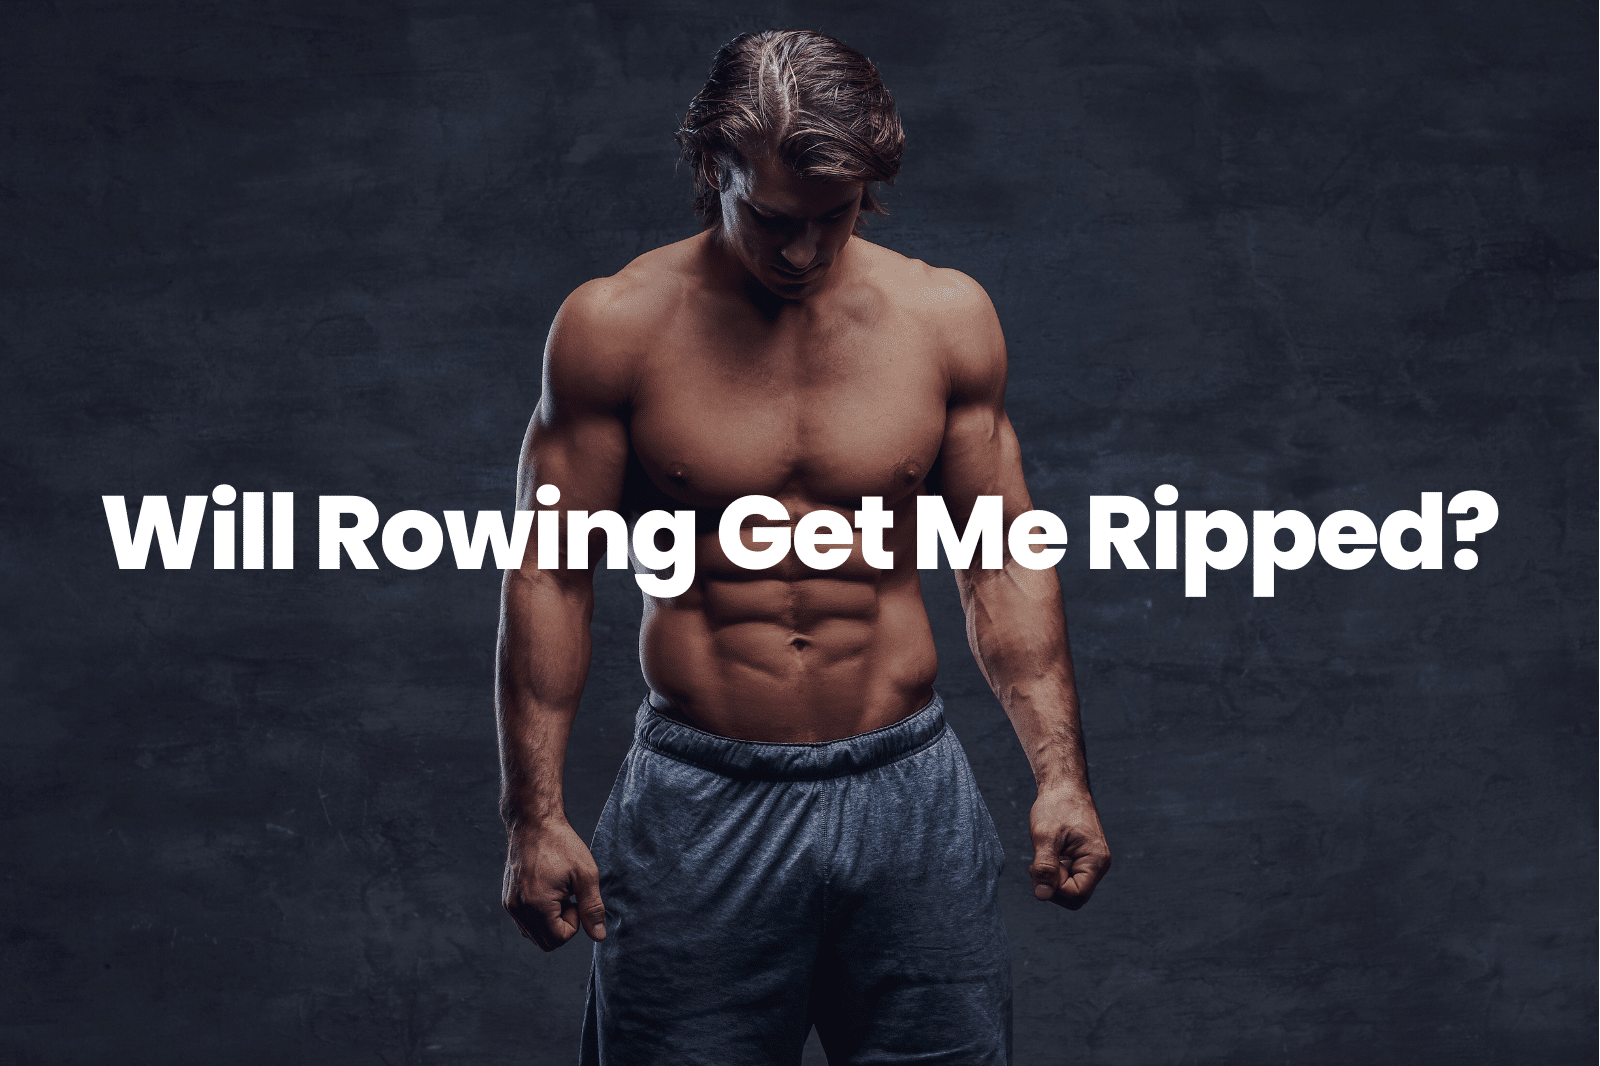 Will Rowing Get Me Ripped